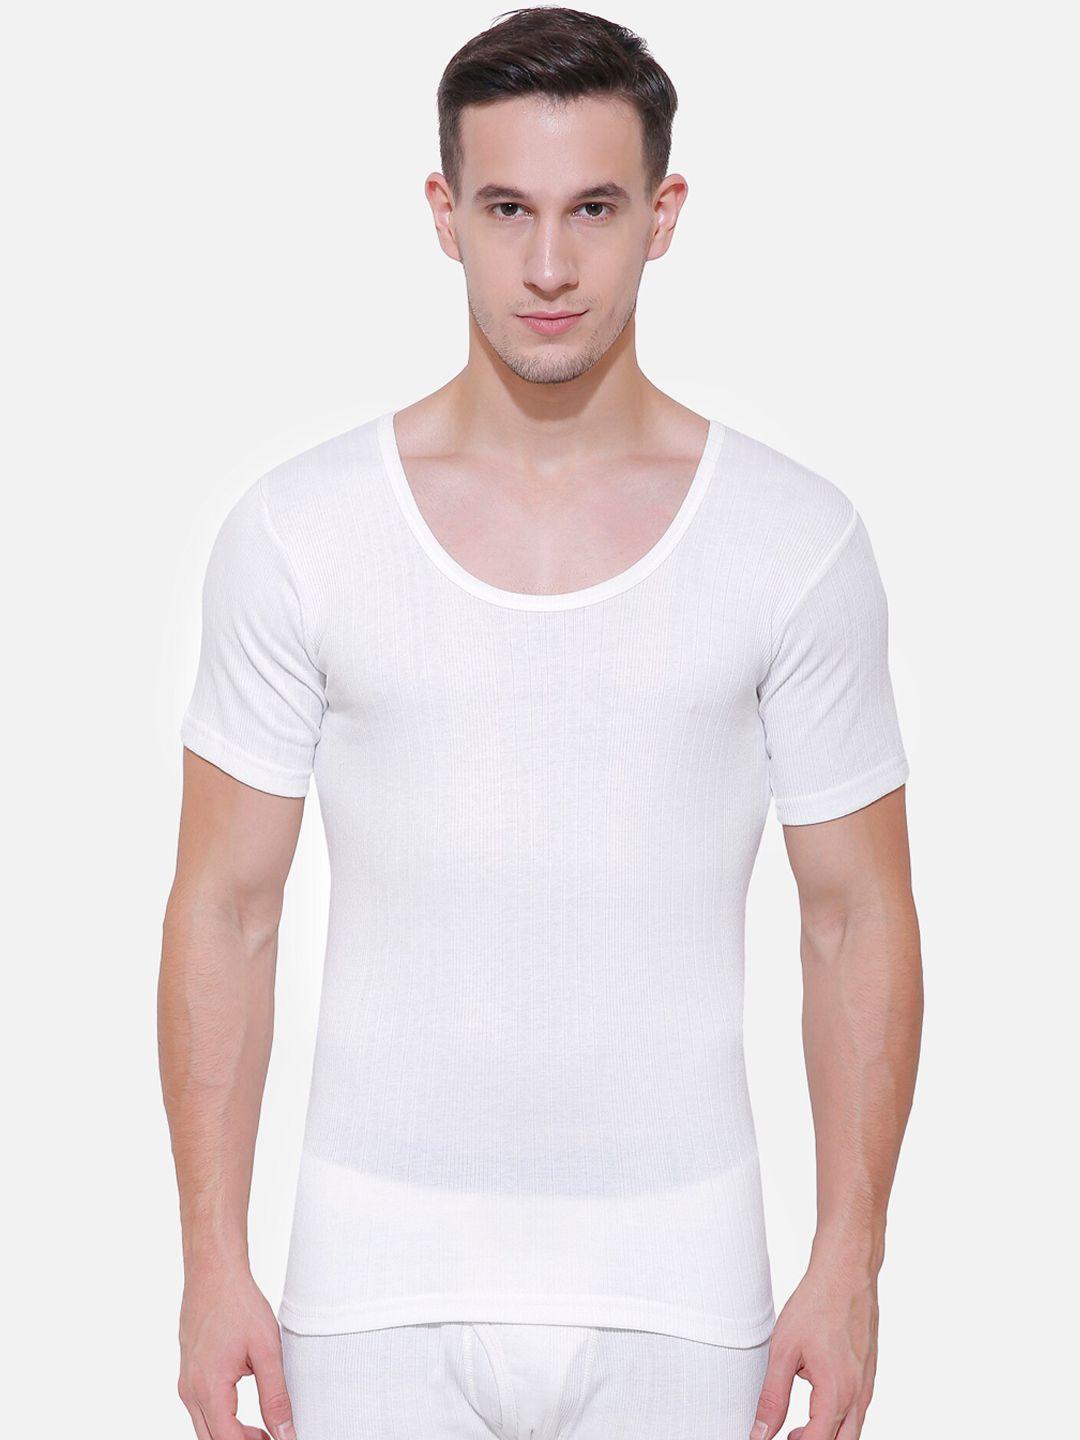 bodycare insider men off white solid thermal top